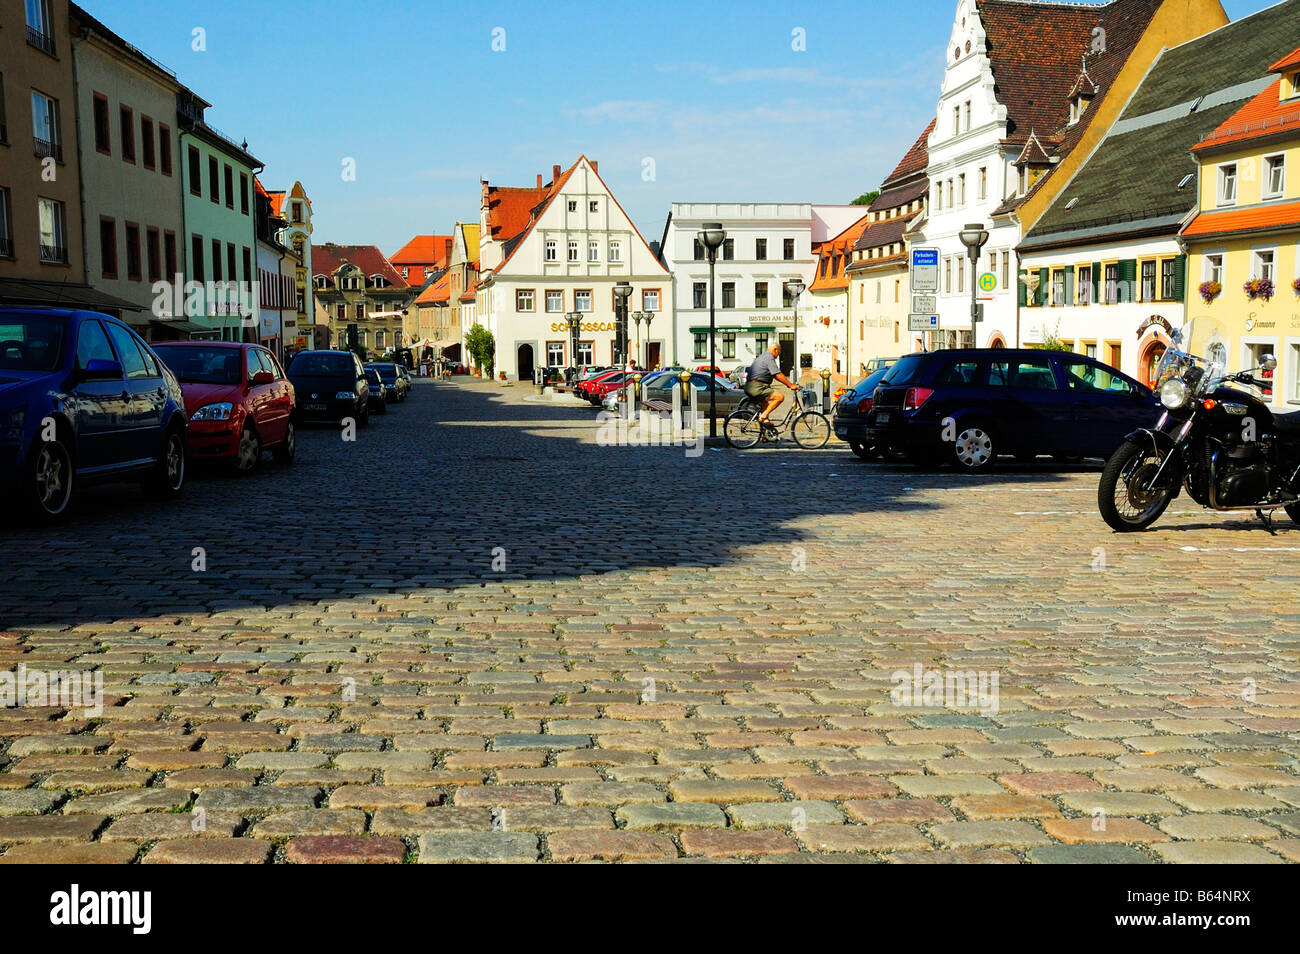 The Town of Colditz, Germany Stock Photo